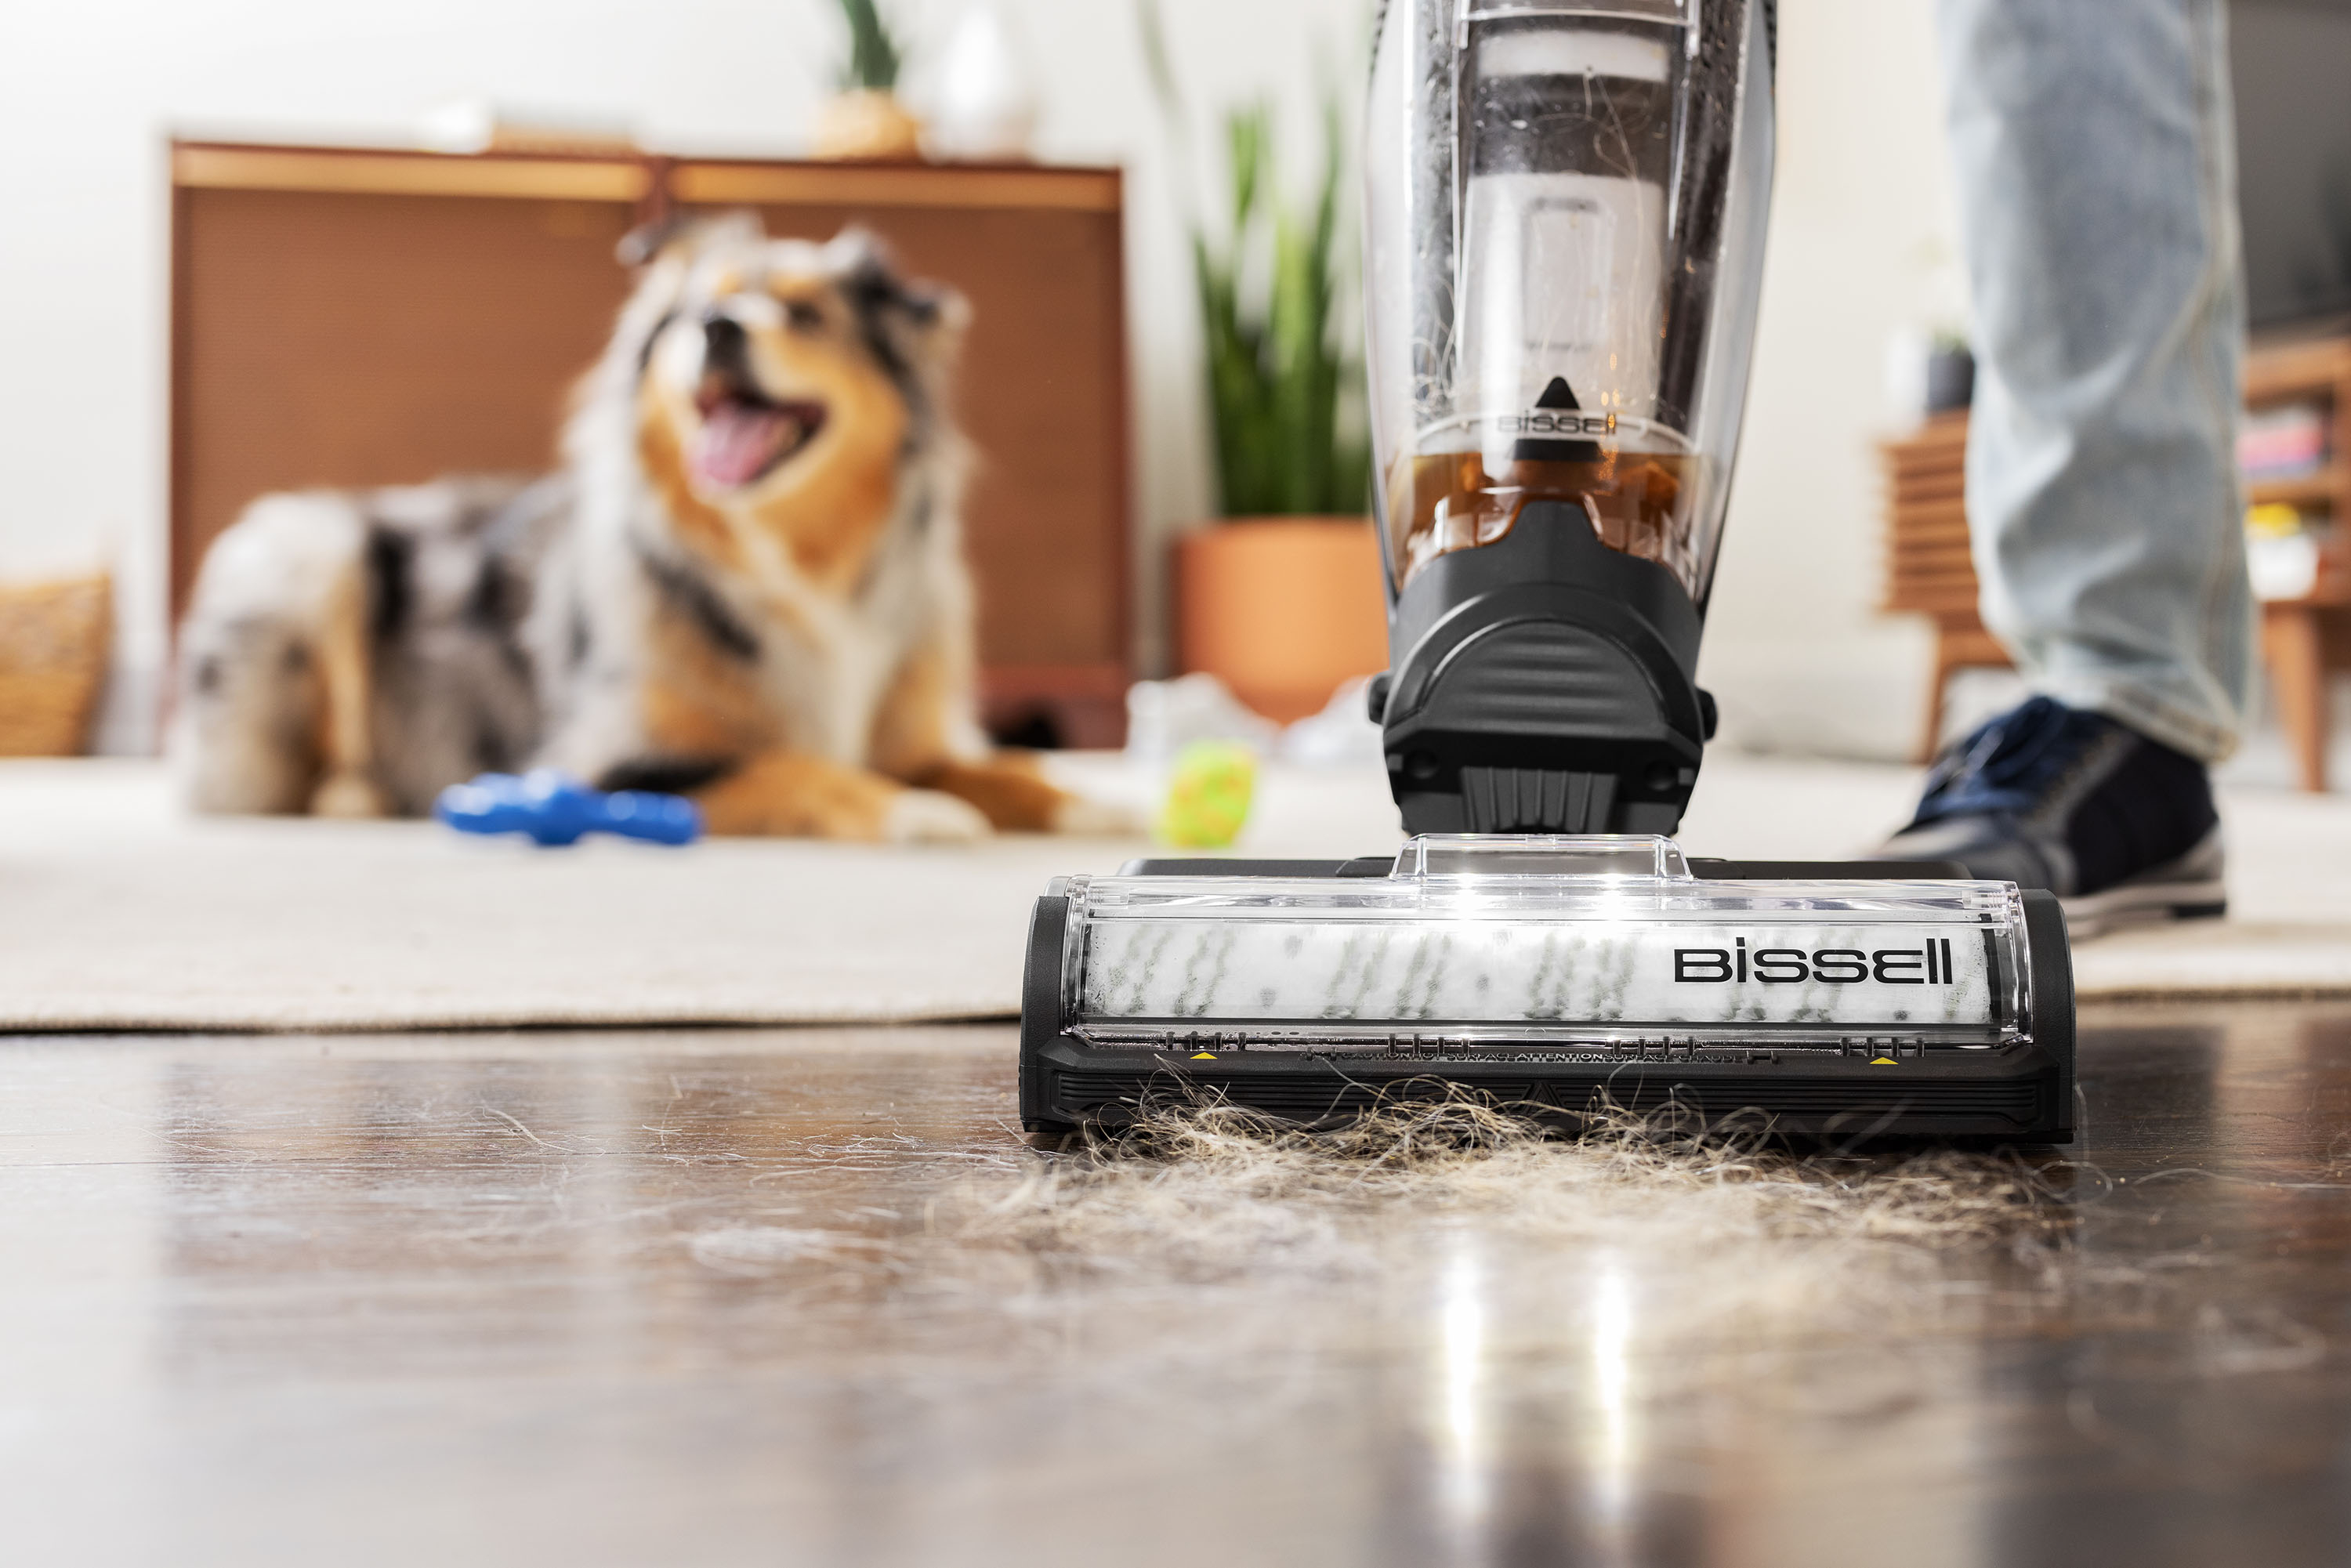 BISSELL® CrossWave® HydroSteam™ Wet Dry Vac, Multi-Purpose Vacuum, Wash,  and Steam, Sanitize Formula Included, 35151, Multicolor, Upright